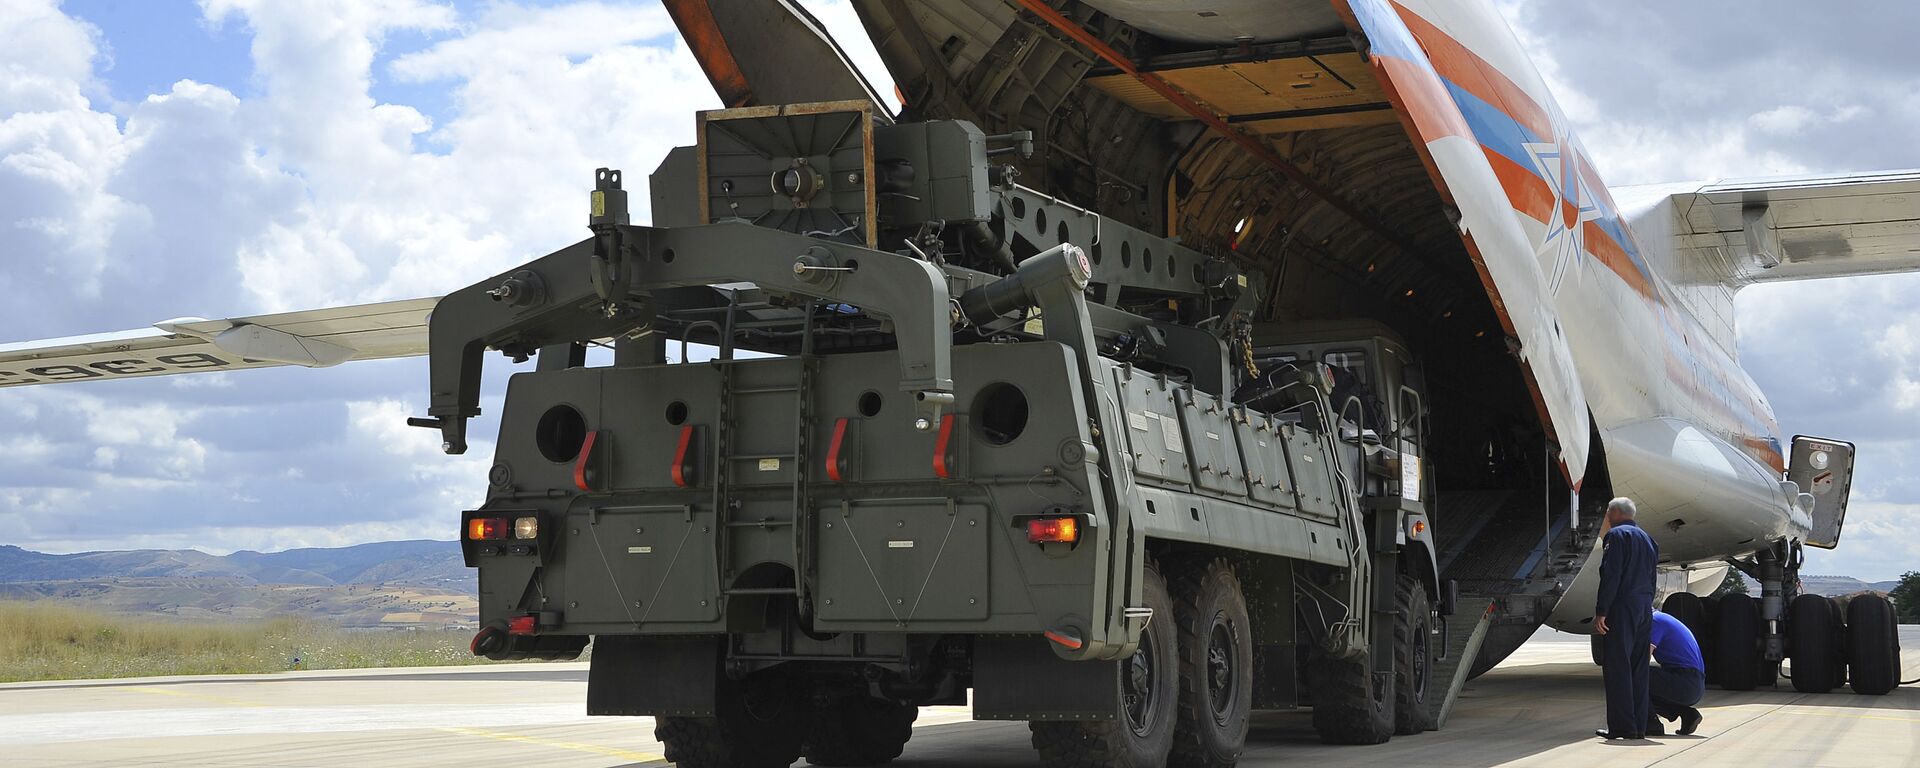 Military vehicles and equipment, parts of the S-400 air defense systems, are unloaded from a Russian transport aircraft, at Murted military airport in Ankara, Turkey, Friday, July 12, 2019 - Sputnik International, 1920, 05.10.2021